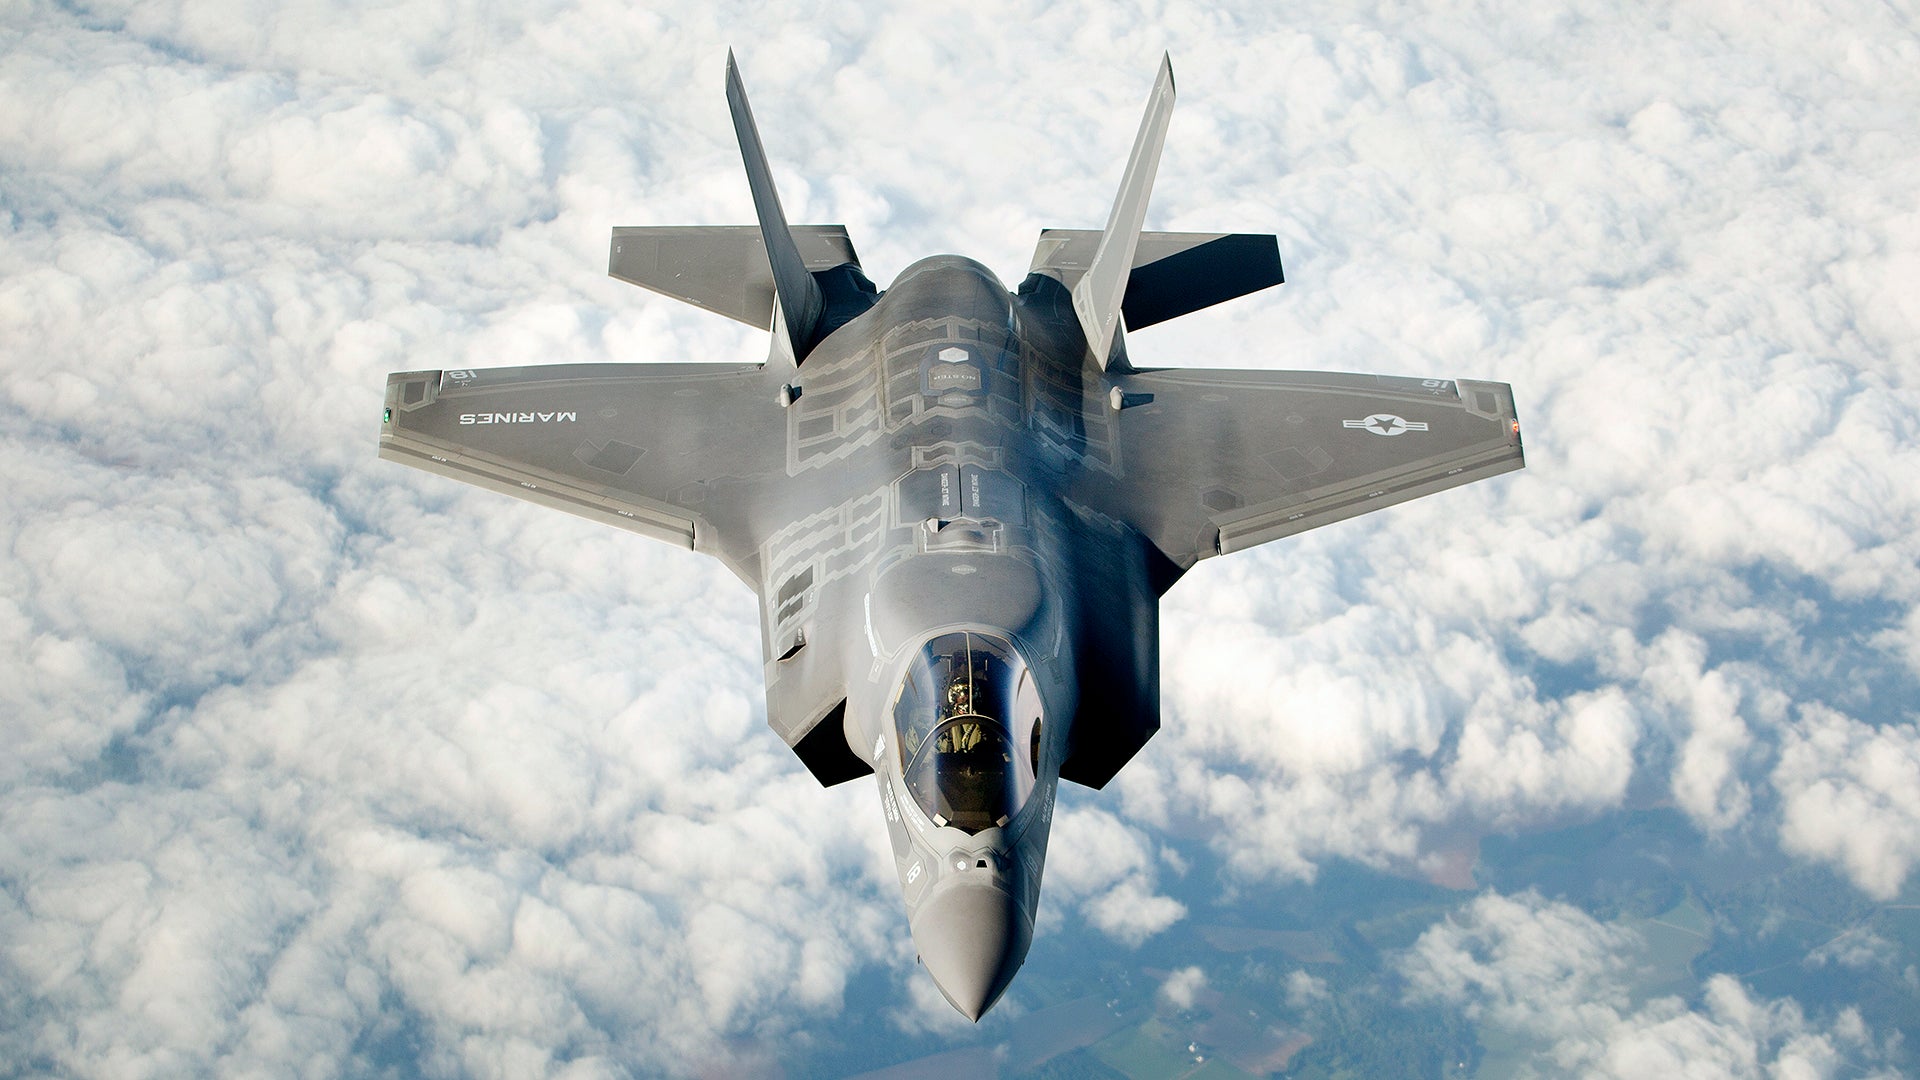 A strange situation is unfolding in South Carolina. An F-35B pilot ejected from their aircraft today around 2:00 PM local time in an area north of Joi